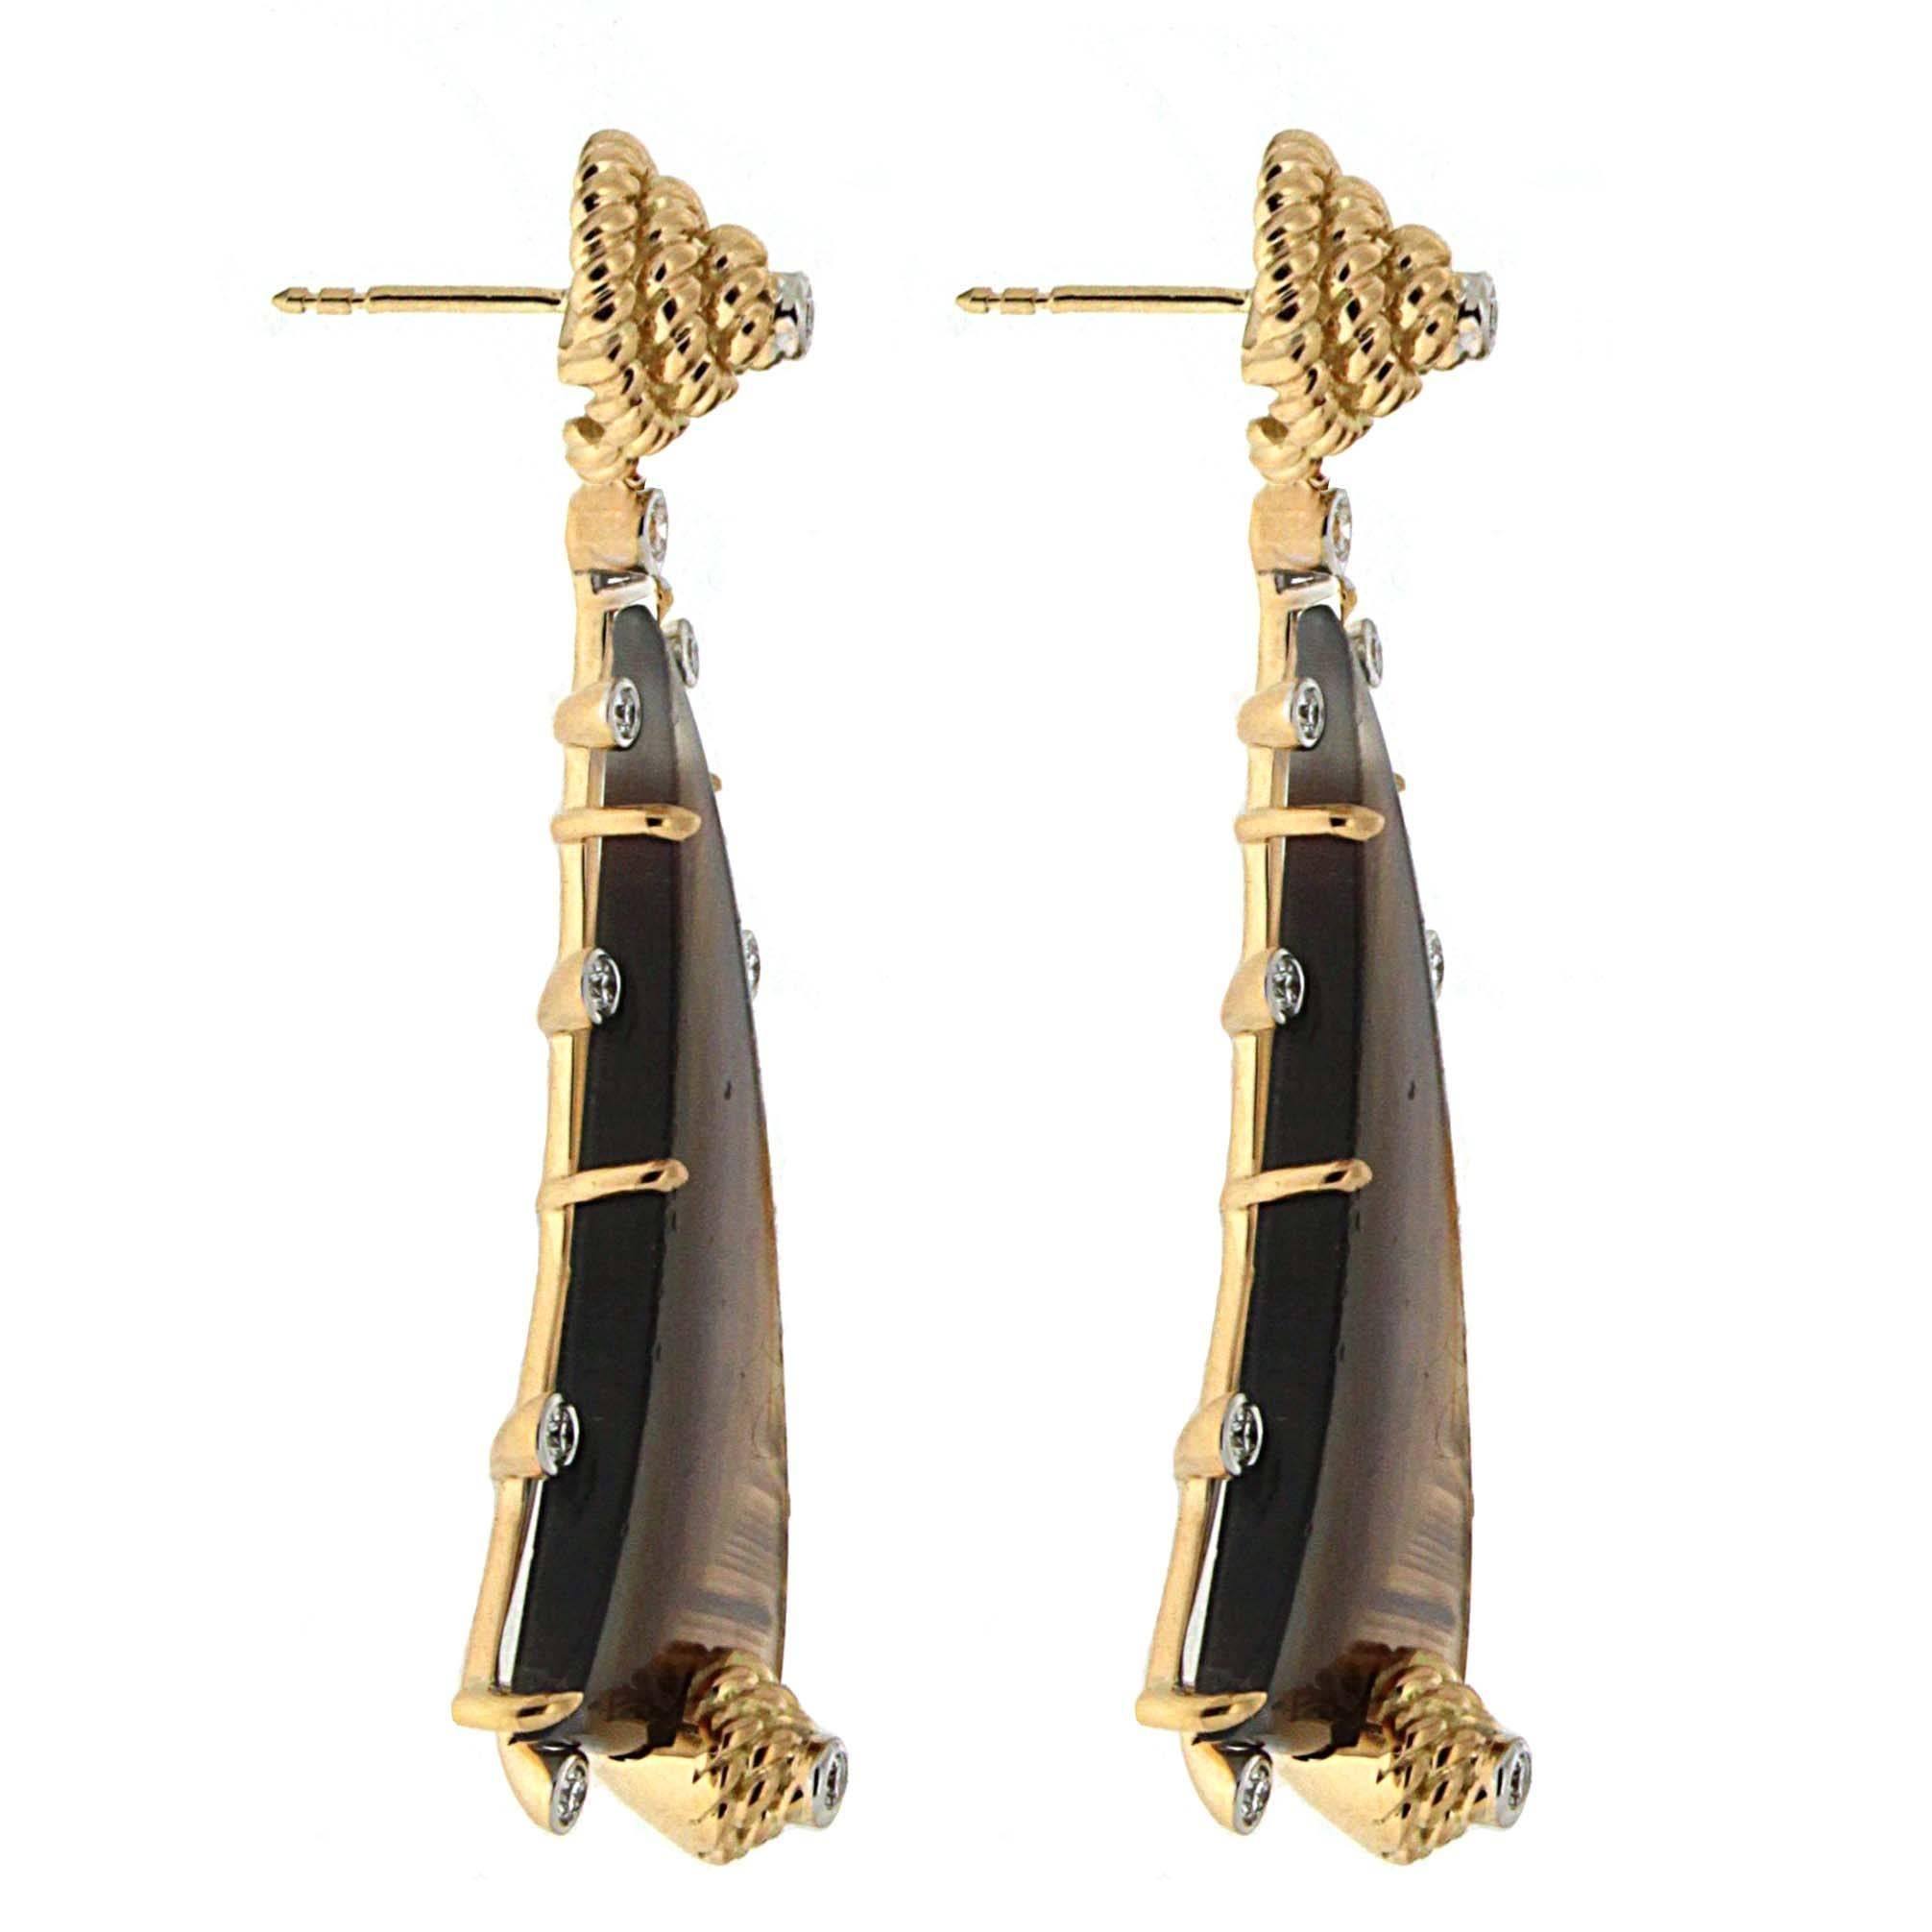 These drop earrings shimmer with warm earth tones. The design begins with an 18k yellow gold braid in a tight spiral where a brilliant cut diamond sits in the middle. Descending from this is a gold curved asymmetrical triangle, which supports a